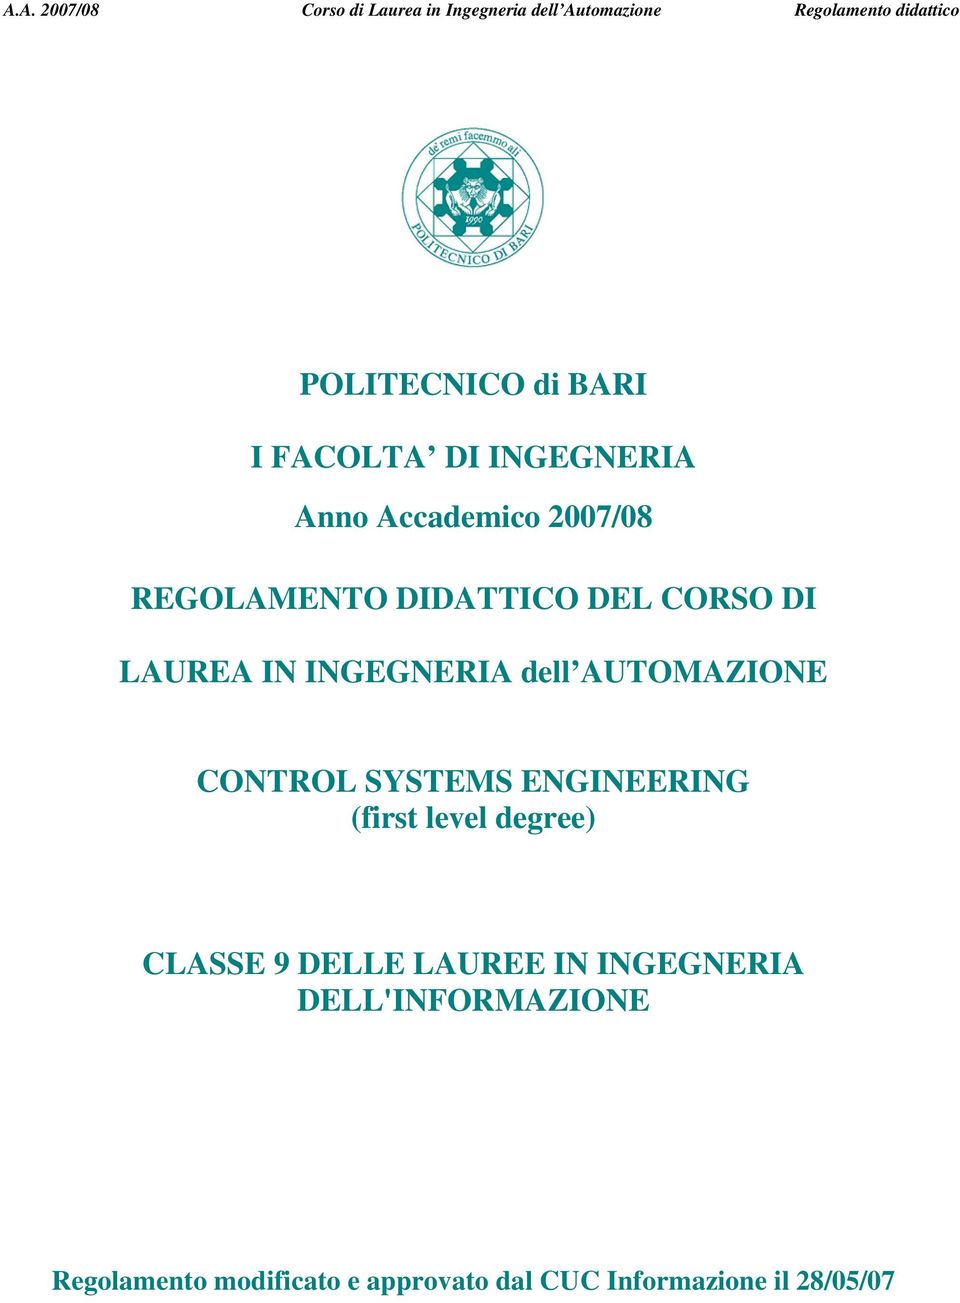 CONTROL SYSTEMS ENGINEERING (first level degree) CLASSE 9 DELLE LAUREE IN